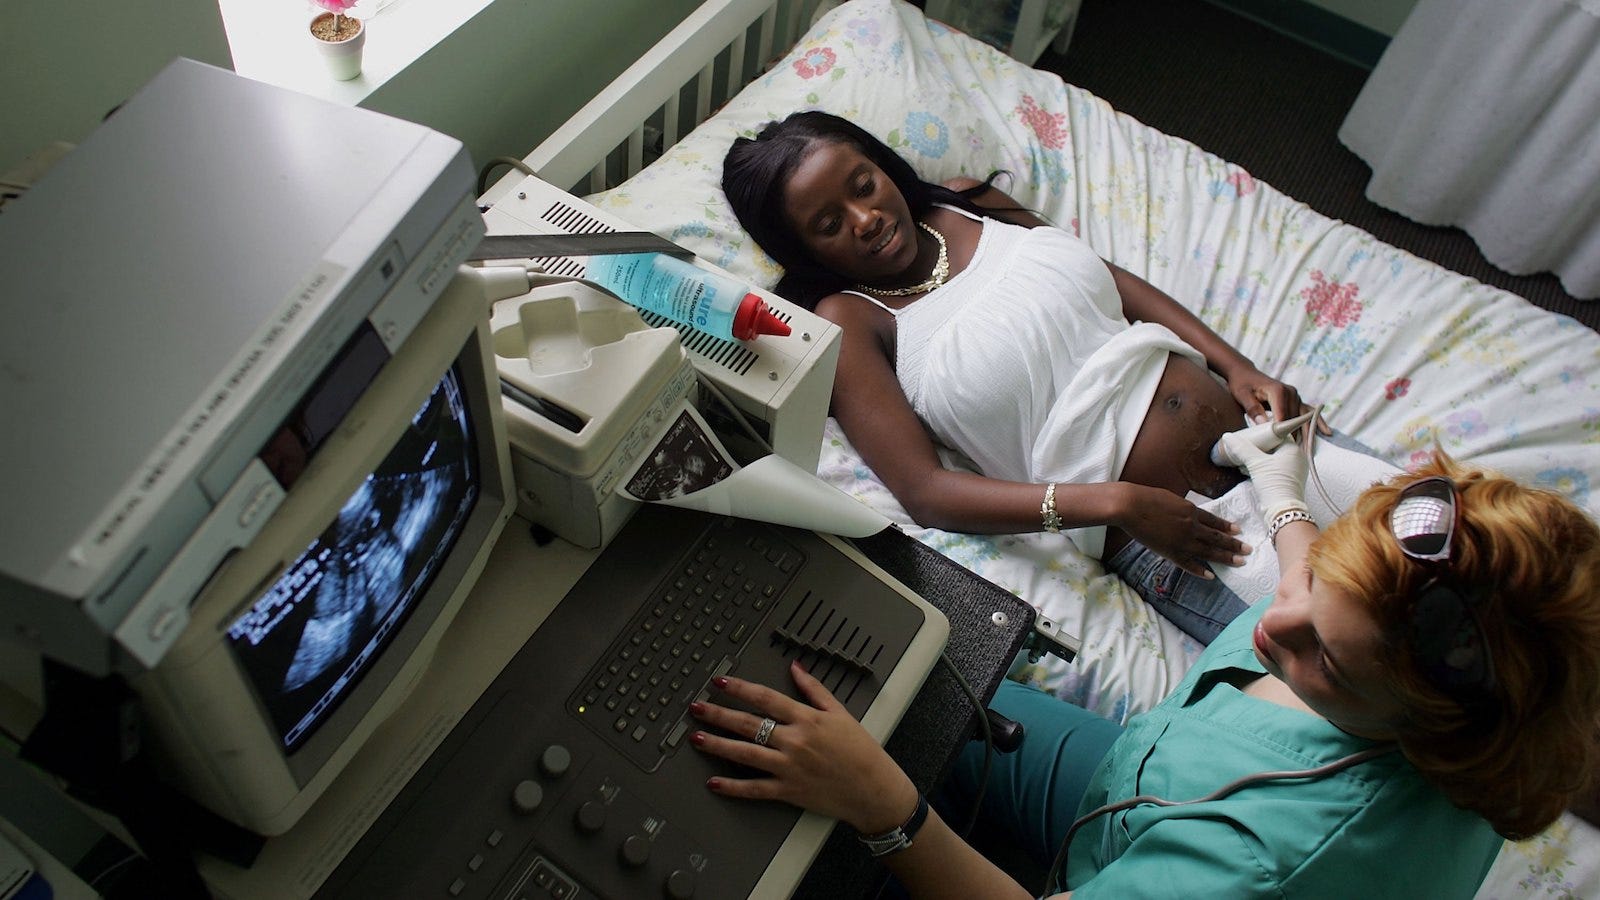 Systemic Racism Might Help Explain Why Black Women Are More Likely To Die From Pregnancy Than